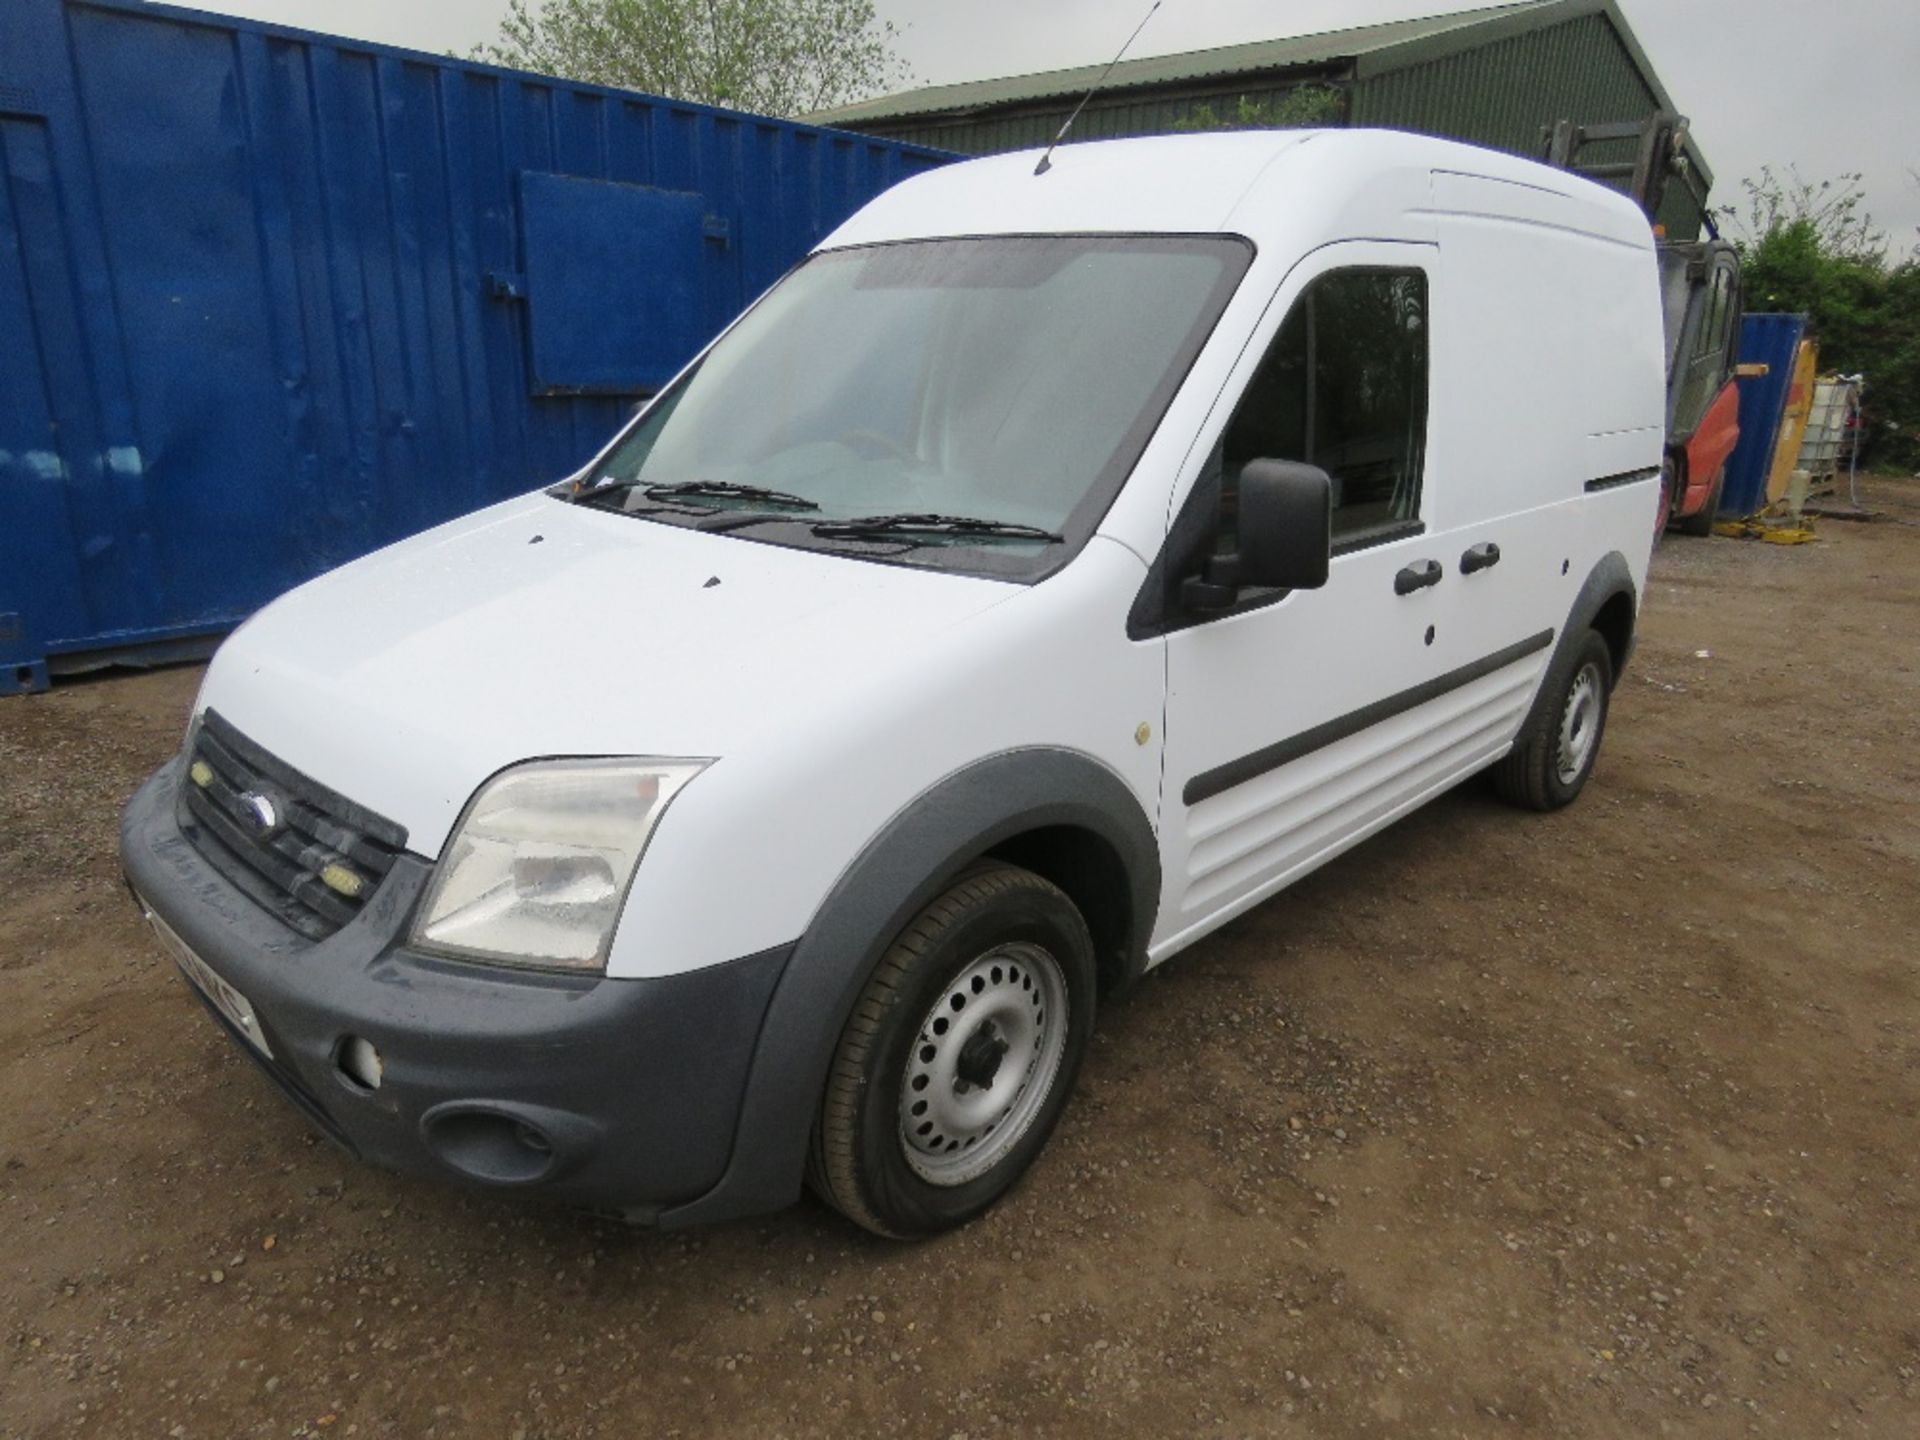 FORD TRANSIT CONNECT PANEL VAN REG:BV13 NKS 1.8LITRE. HIGH ROOF LWB. 83K REC MILES APPROX. WITH V5 A - Image 16 of 26